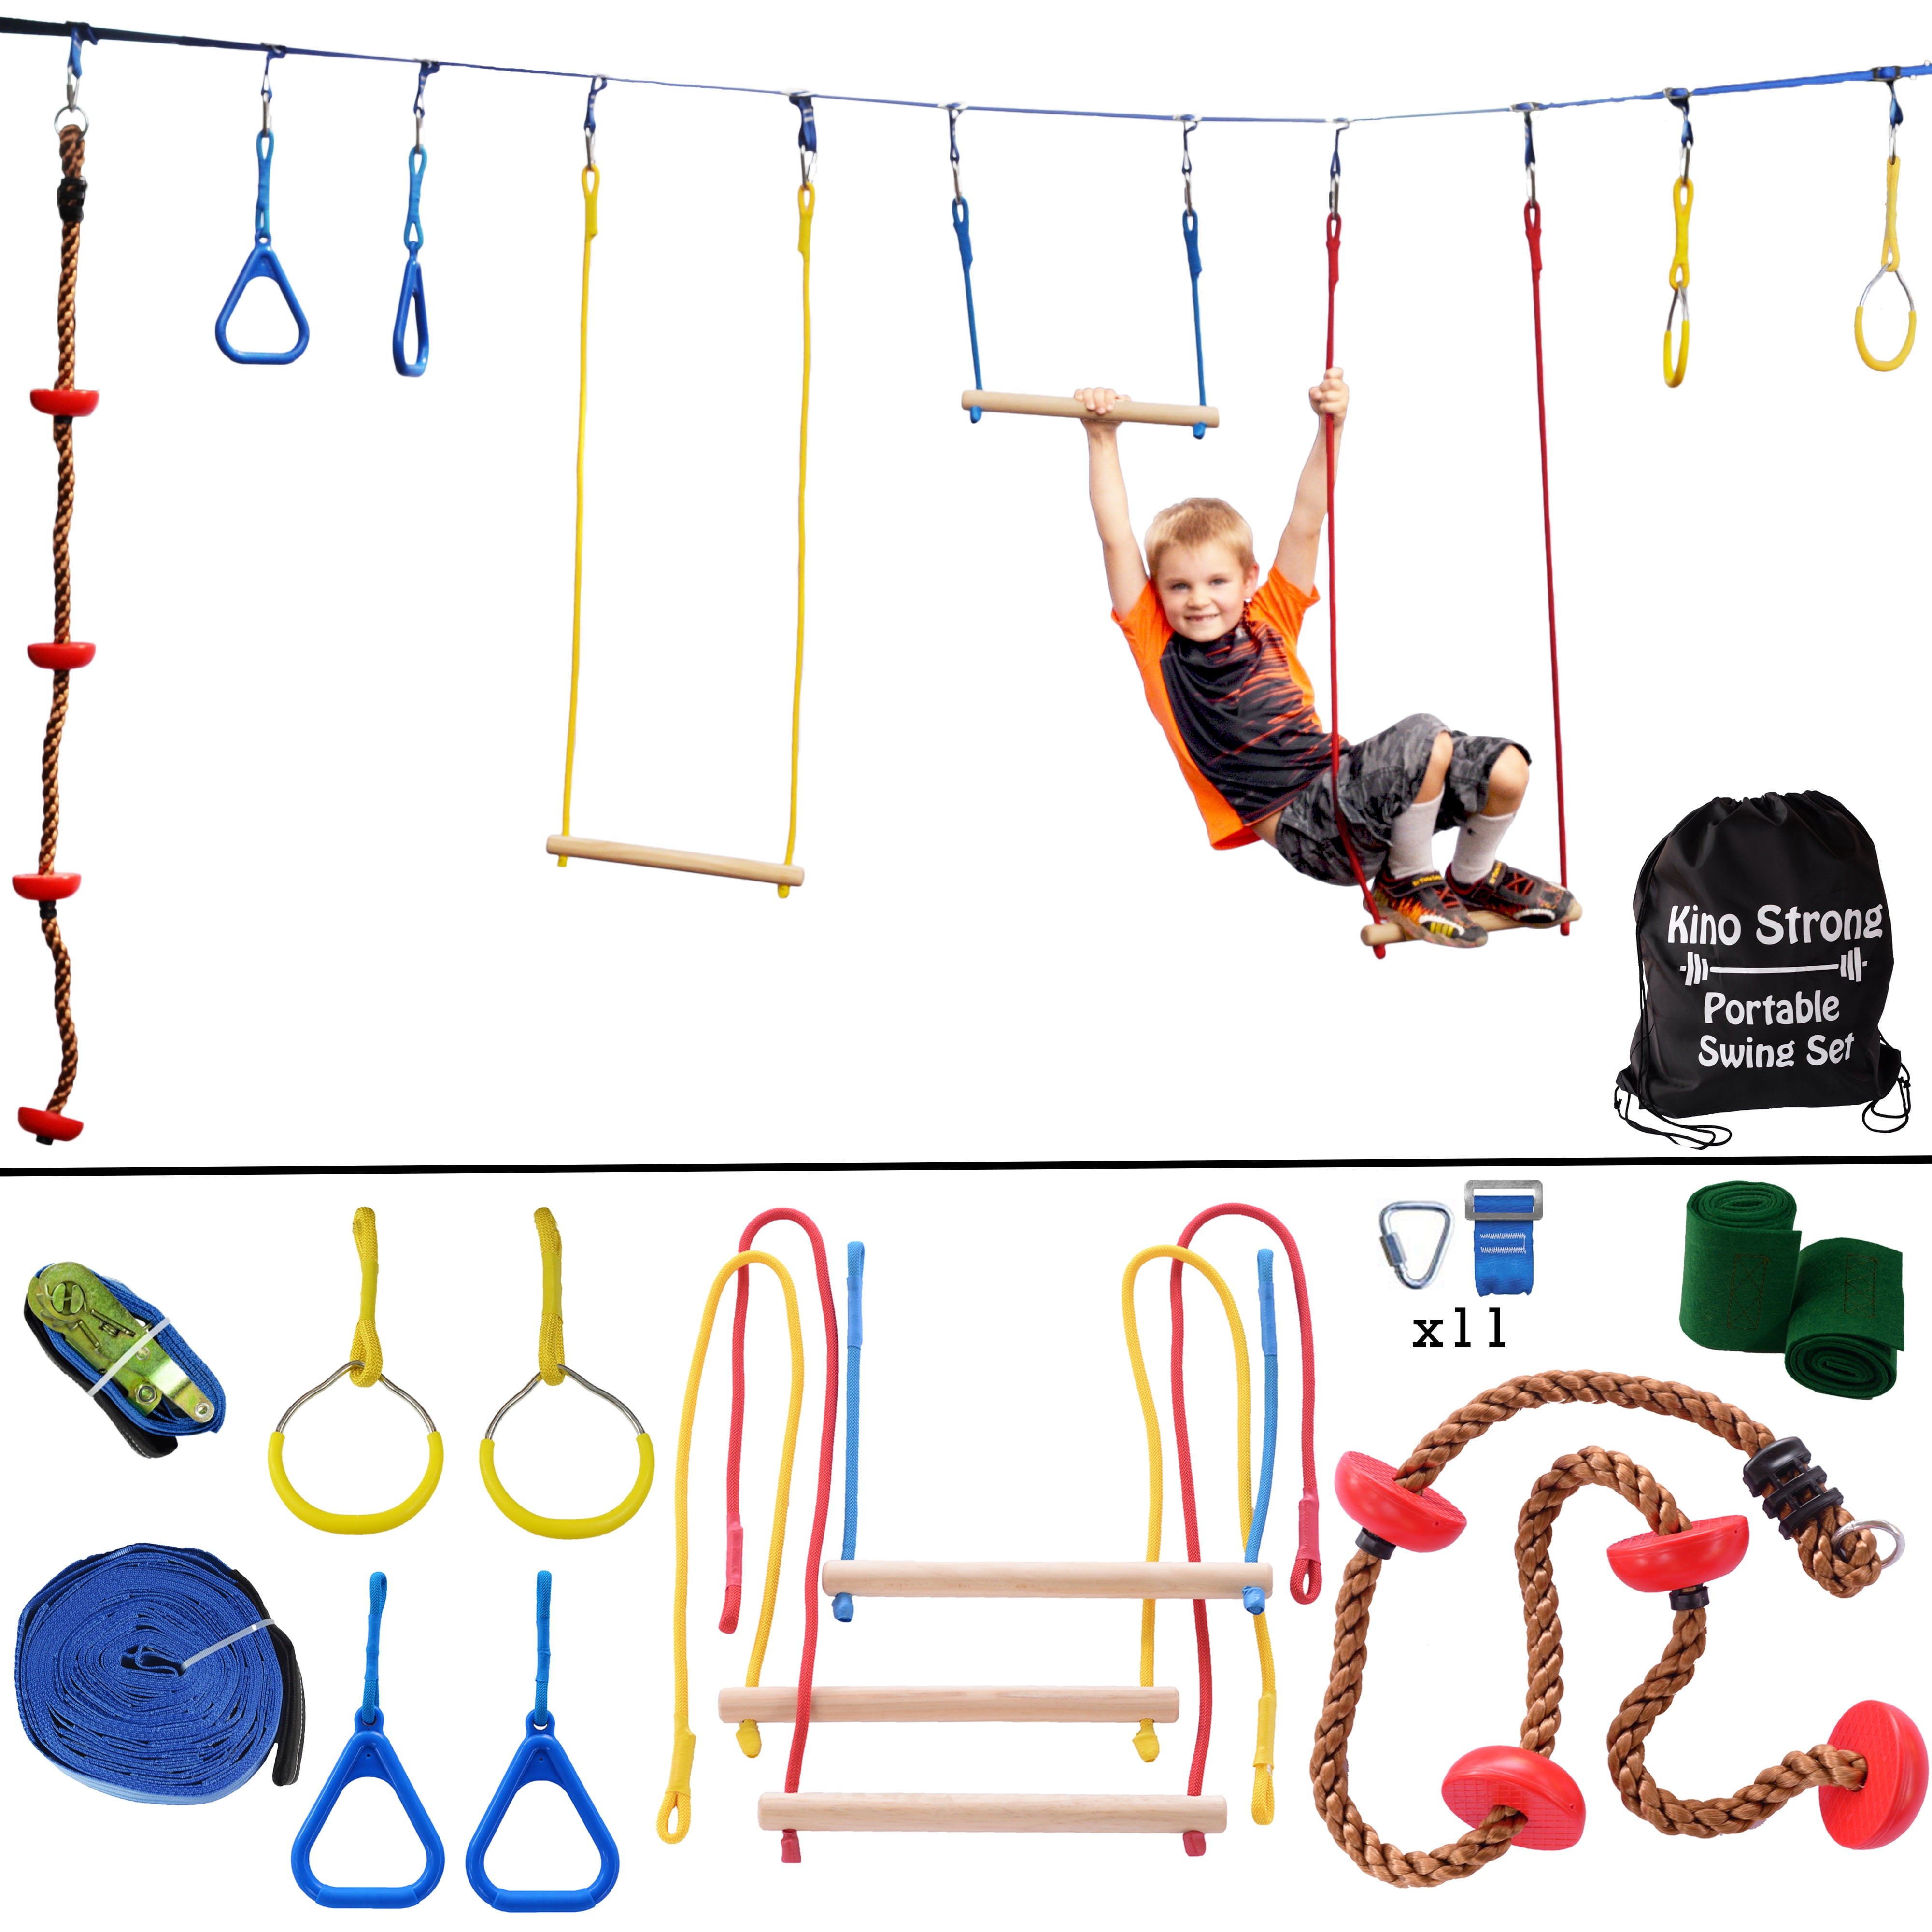 Ninja Obstacle Course NAMEE Hanging Obstacle Course for Kids Climbing Ropes and Swing Seat Easy Setup 50ft Slacklines Balance Strap Ninja Slackline Monkey Bars Kit Holds up to 330lbs 